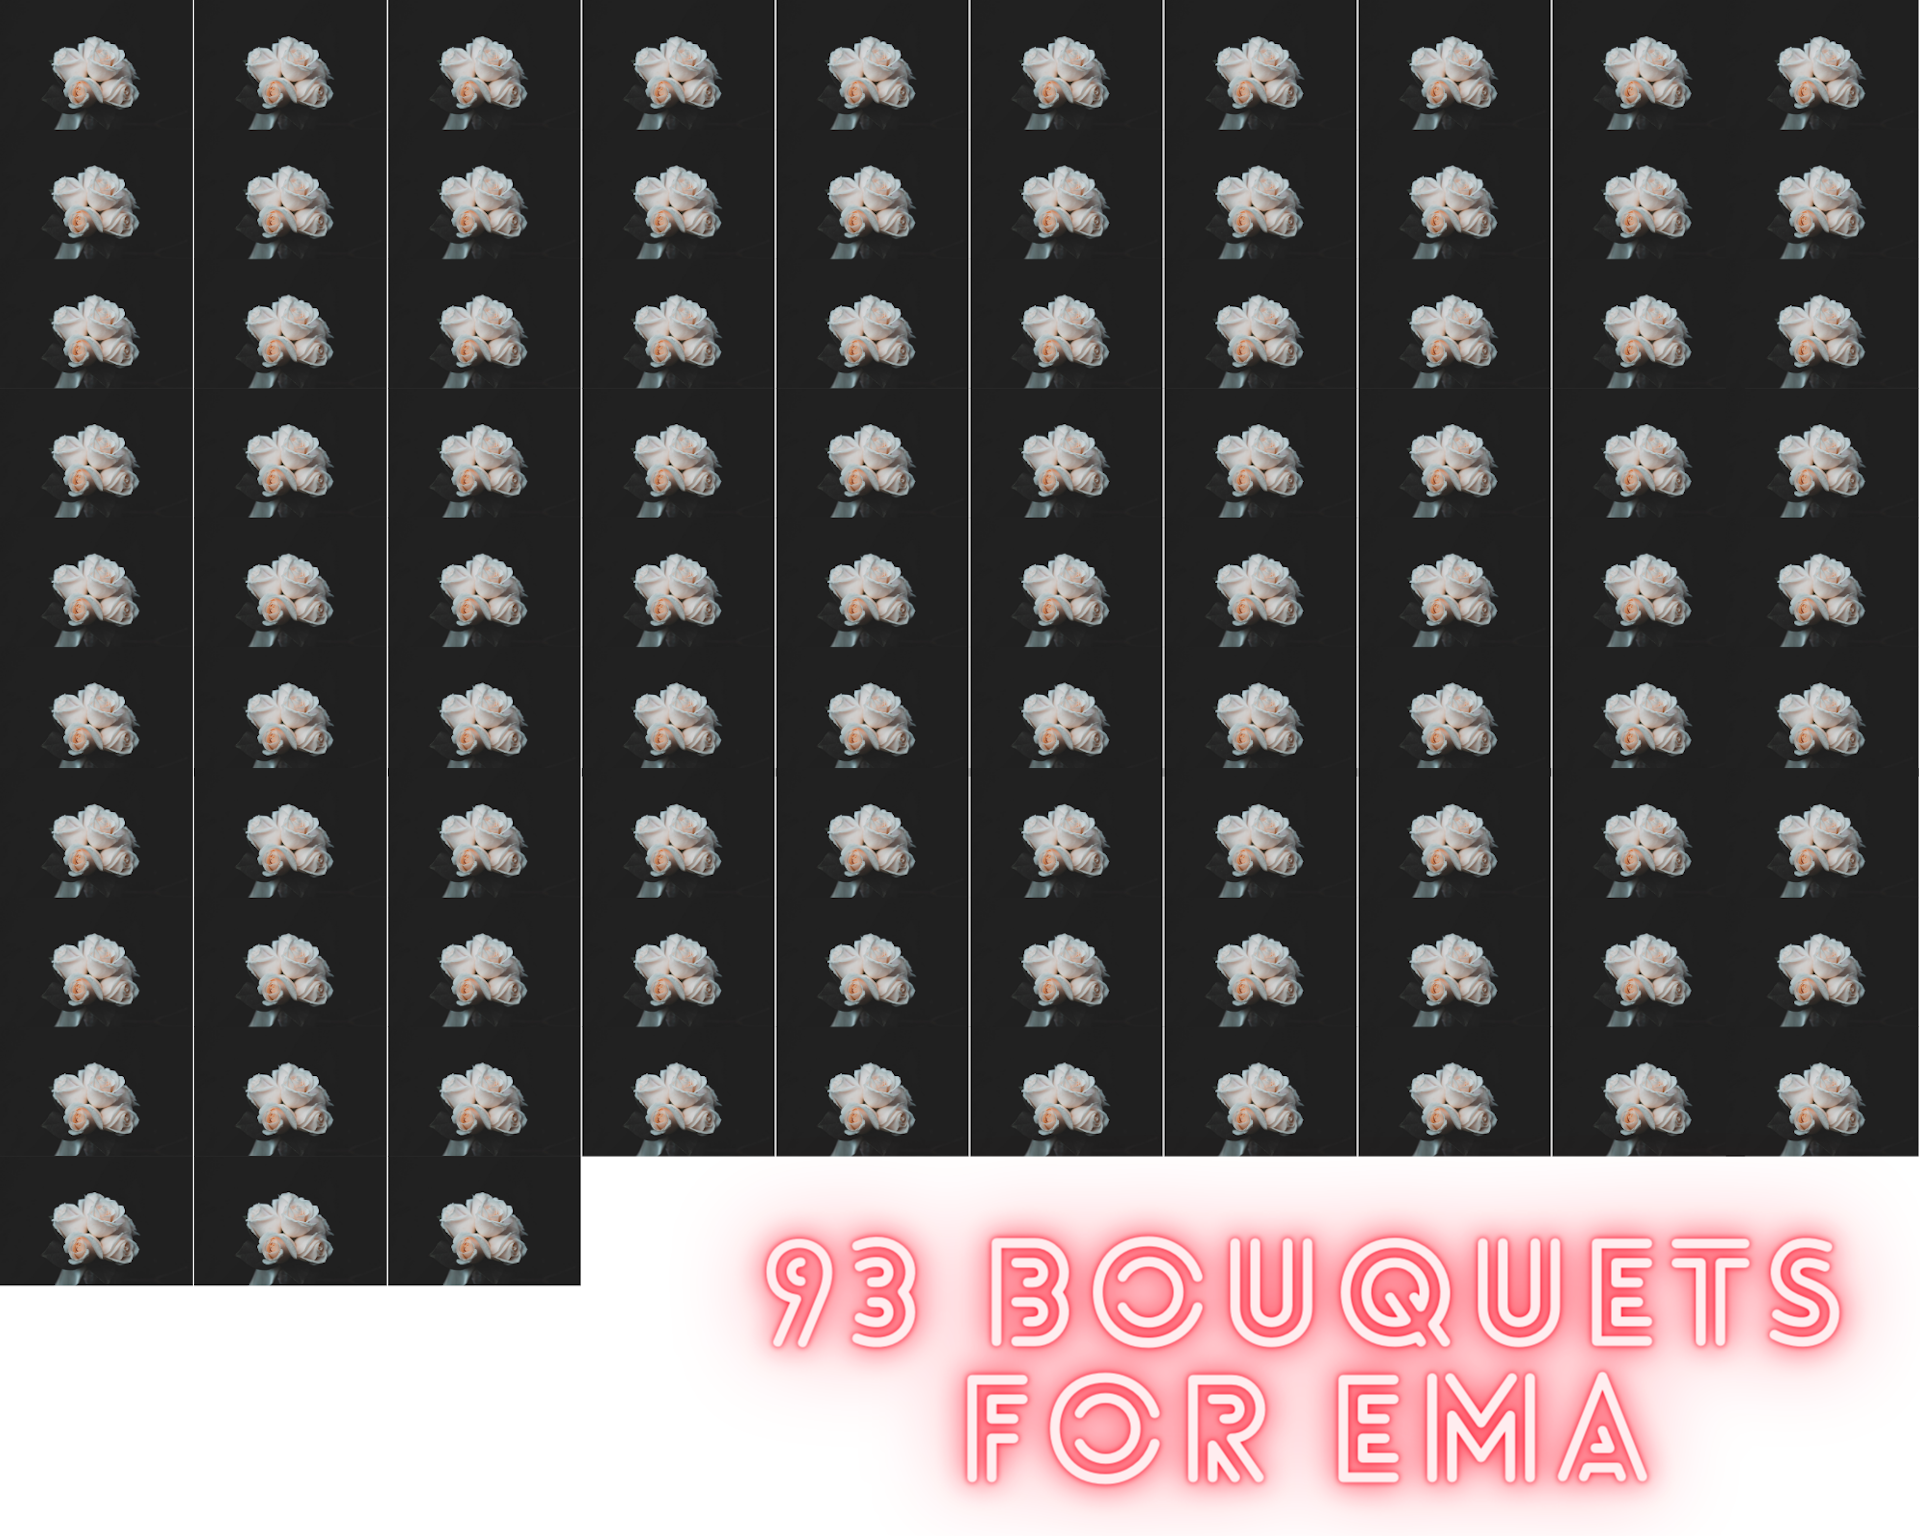 93 Bouquets for EMA